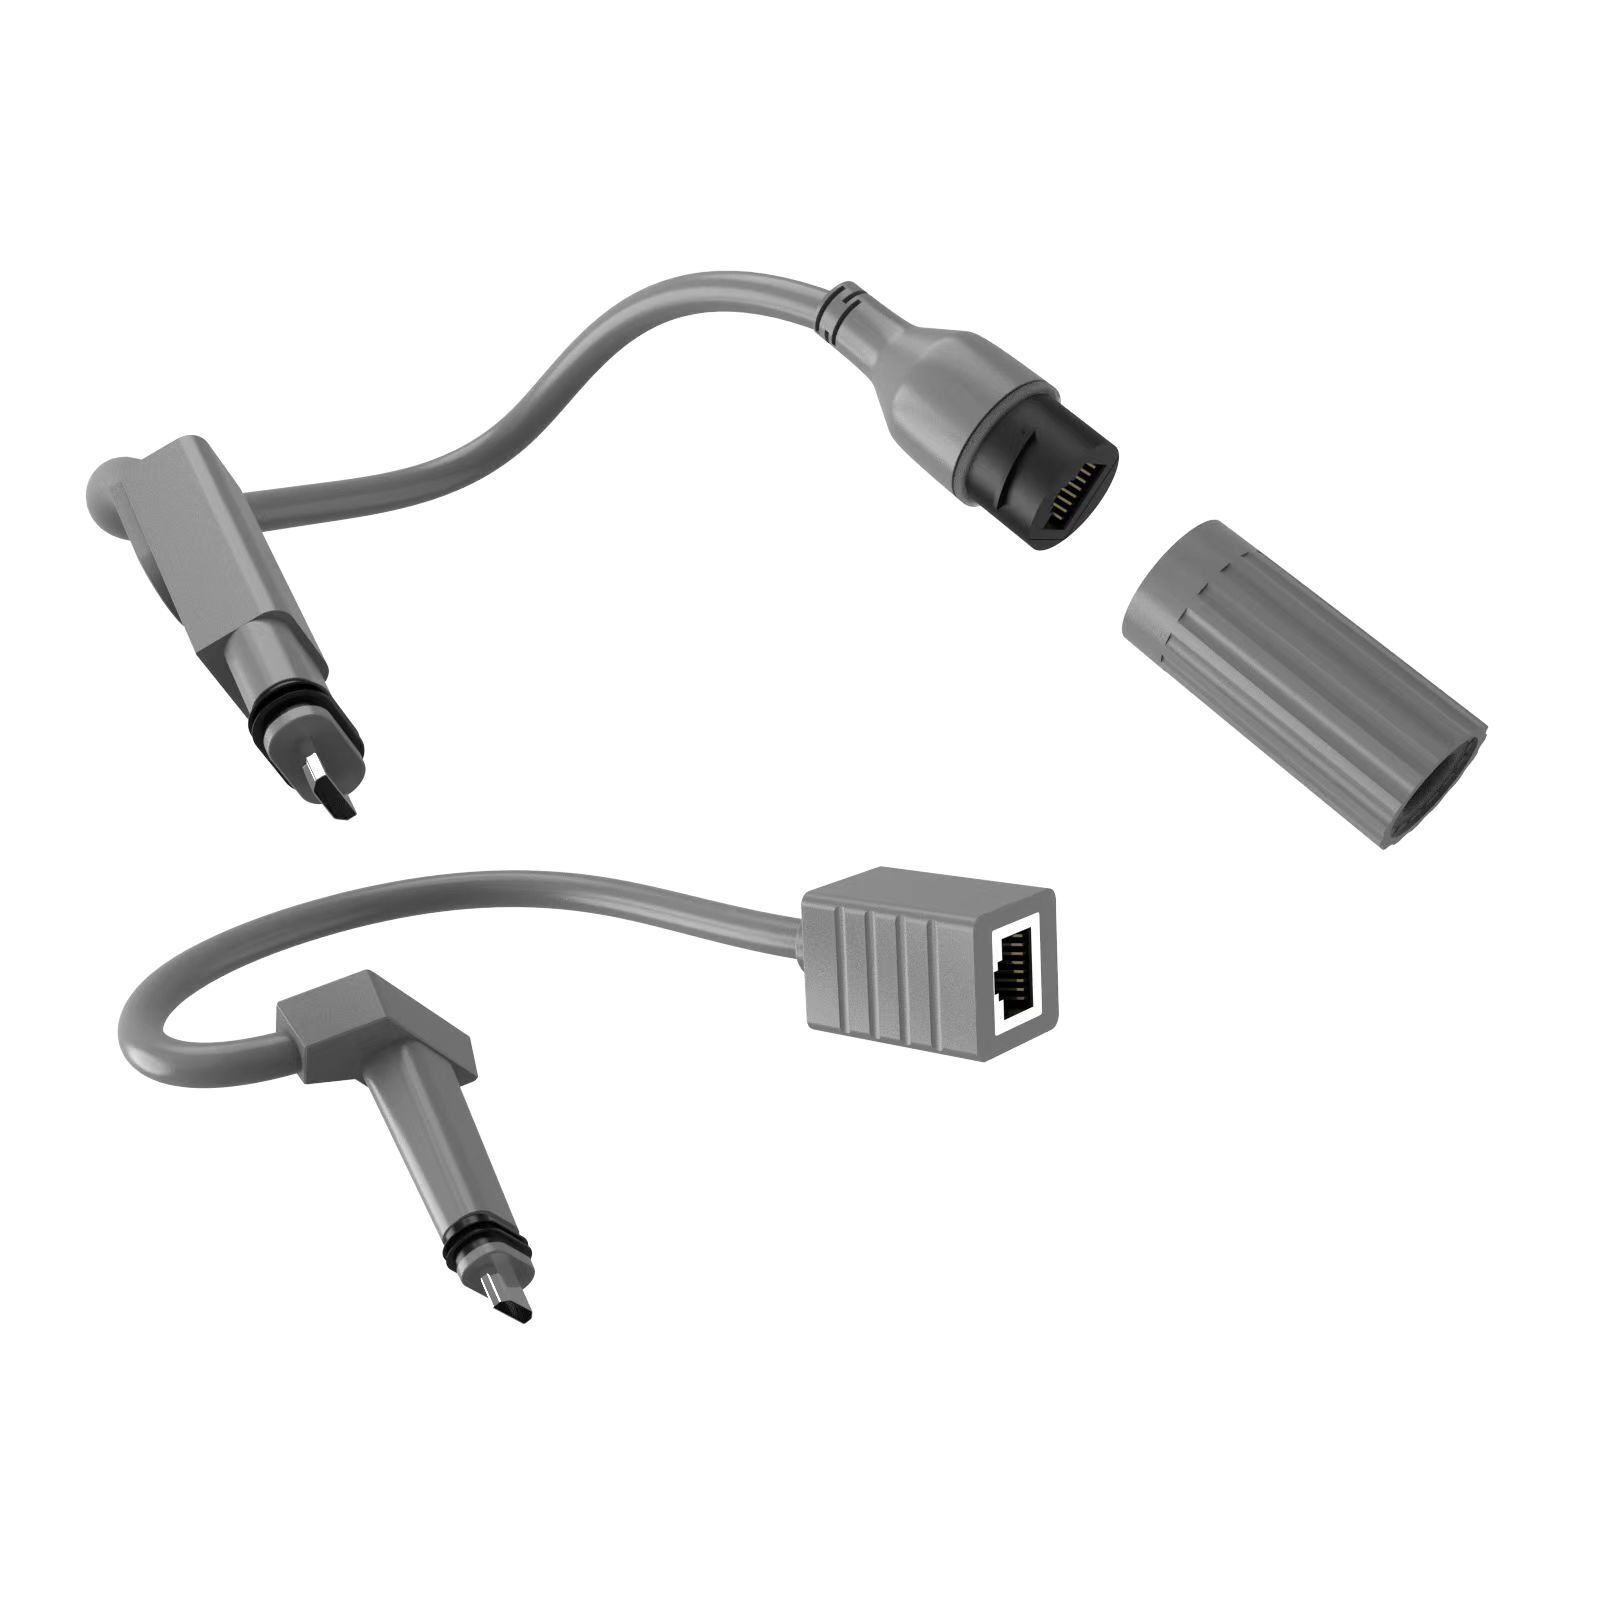 Starlink original cable data extension connecto extension adapter RJ45-1RJ-2